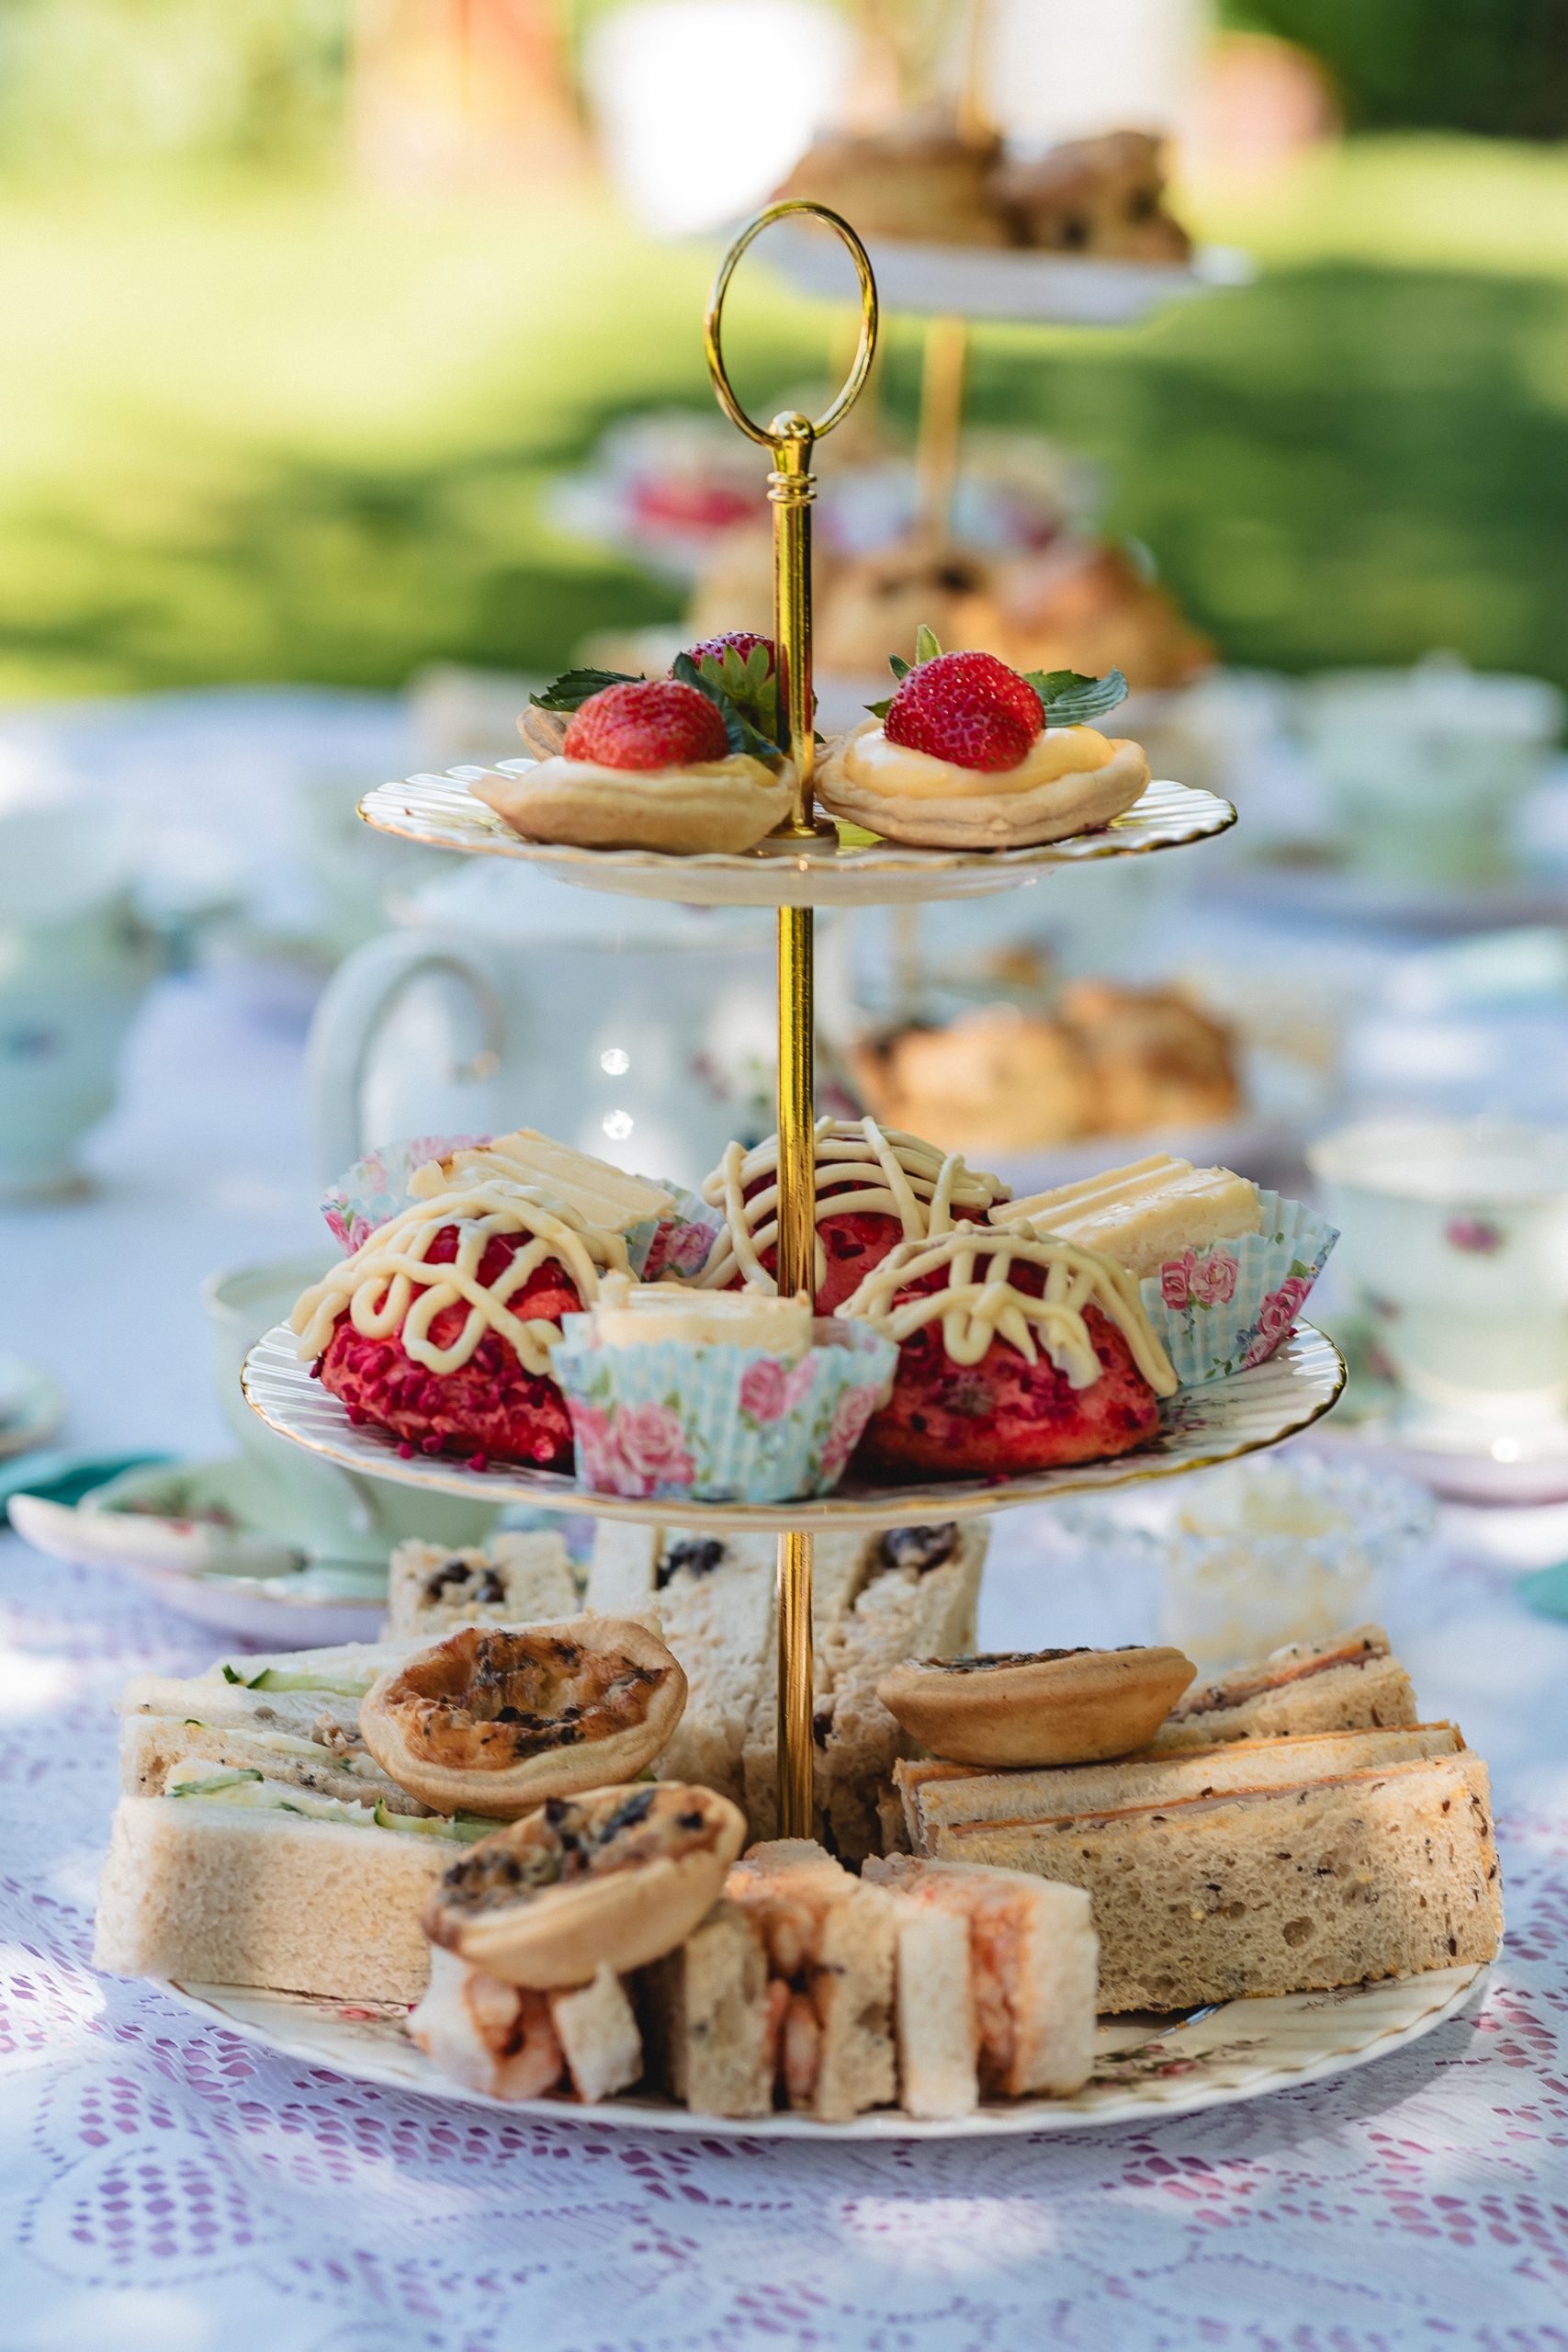 Catering by Carina wedding catering listed on Tie The Knot Wedding Directory